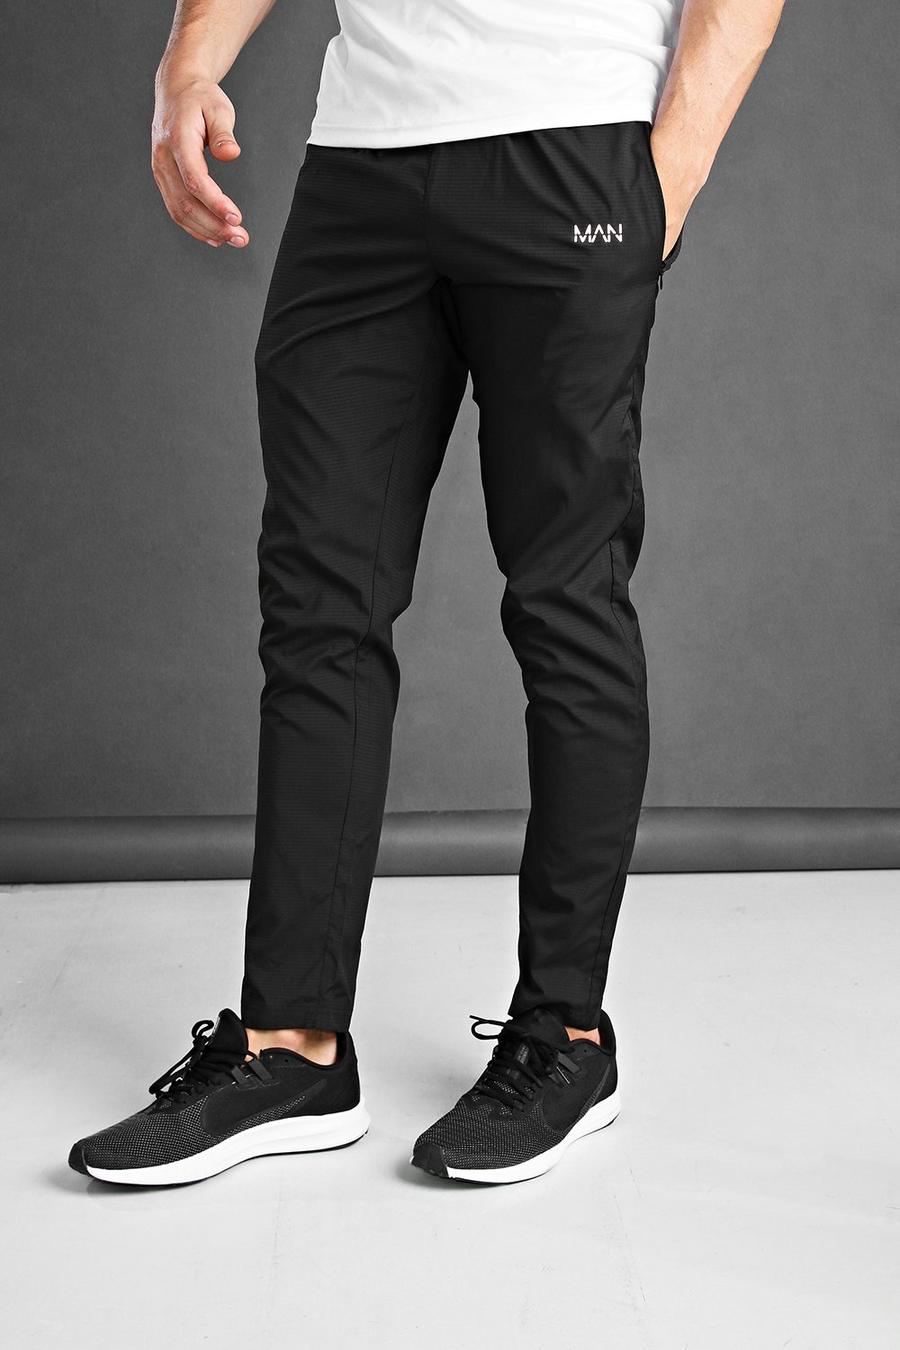 Man Active Gym Skinny Woven Joggers